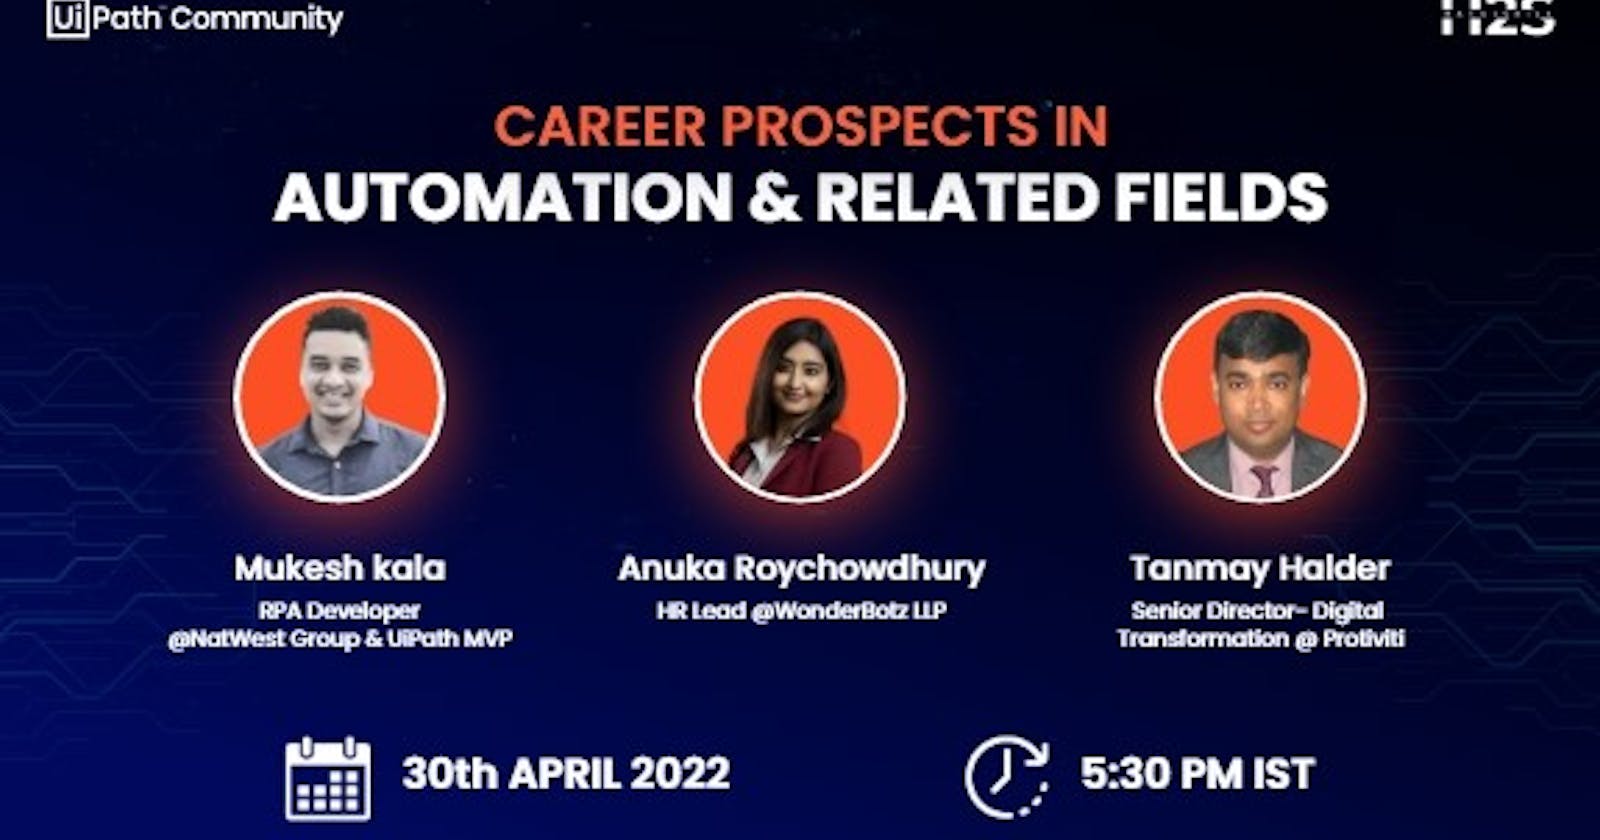 Career Prospects in Automation & Related Fields